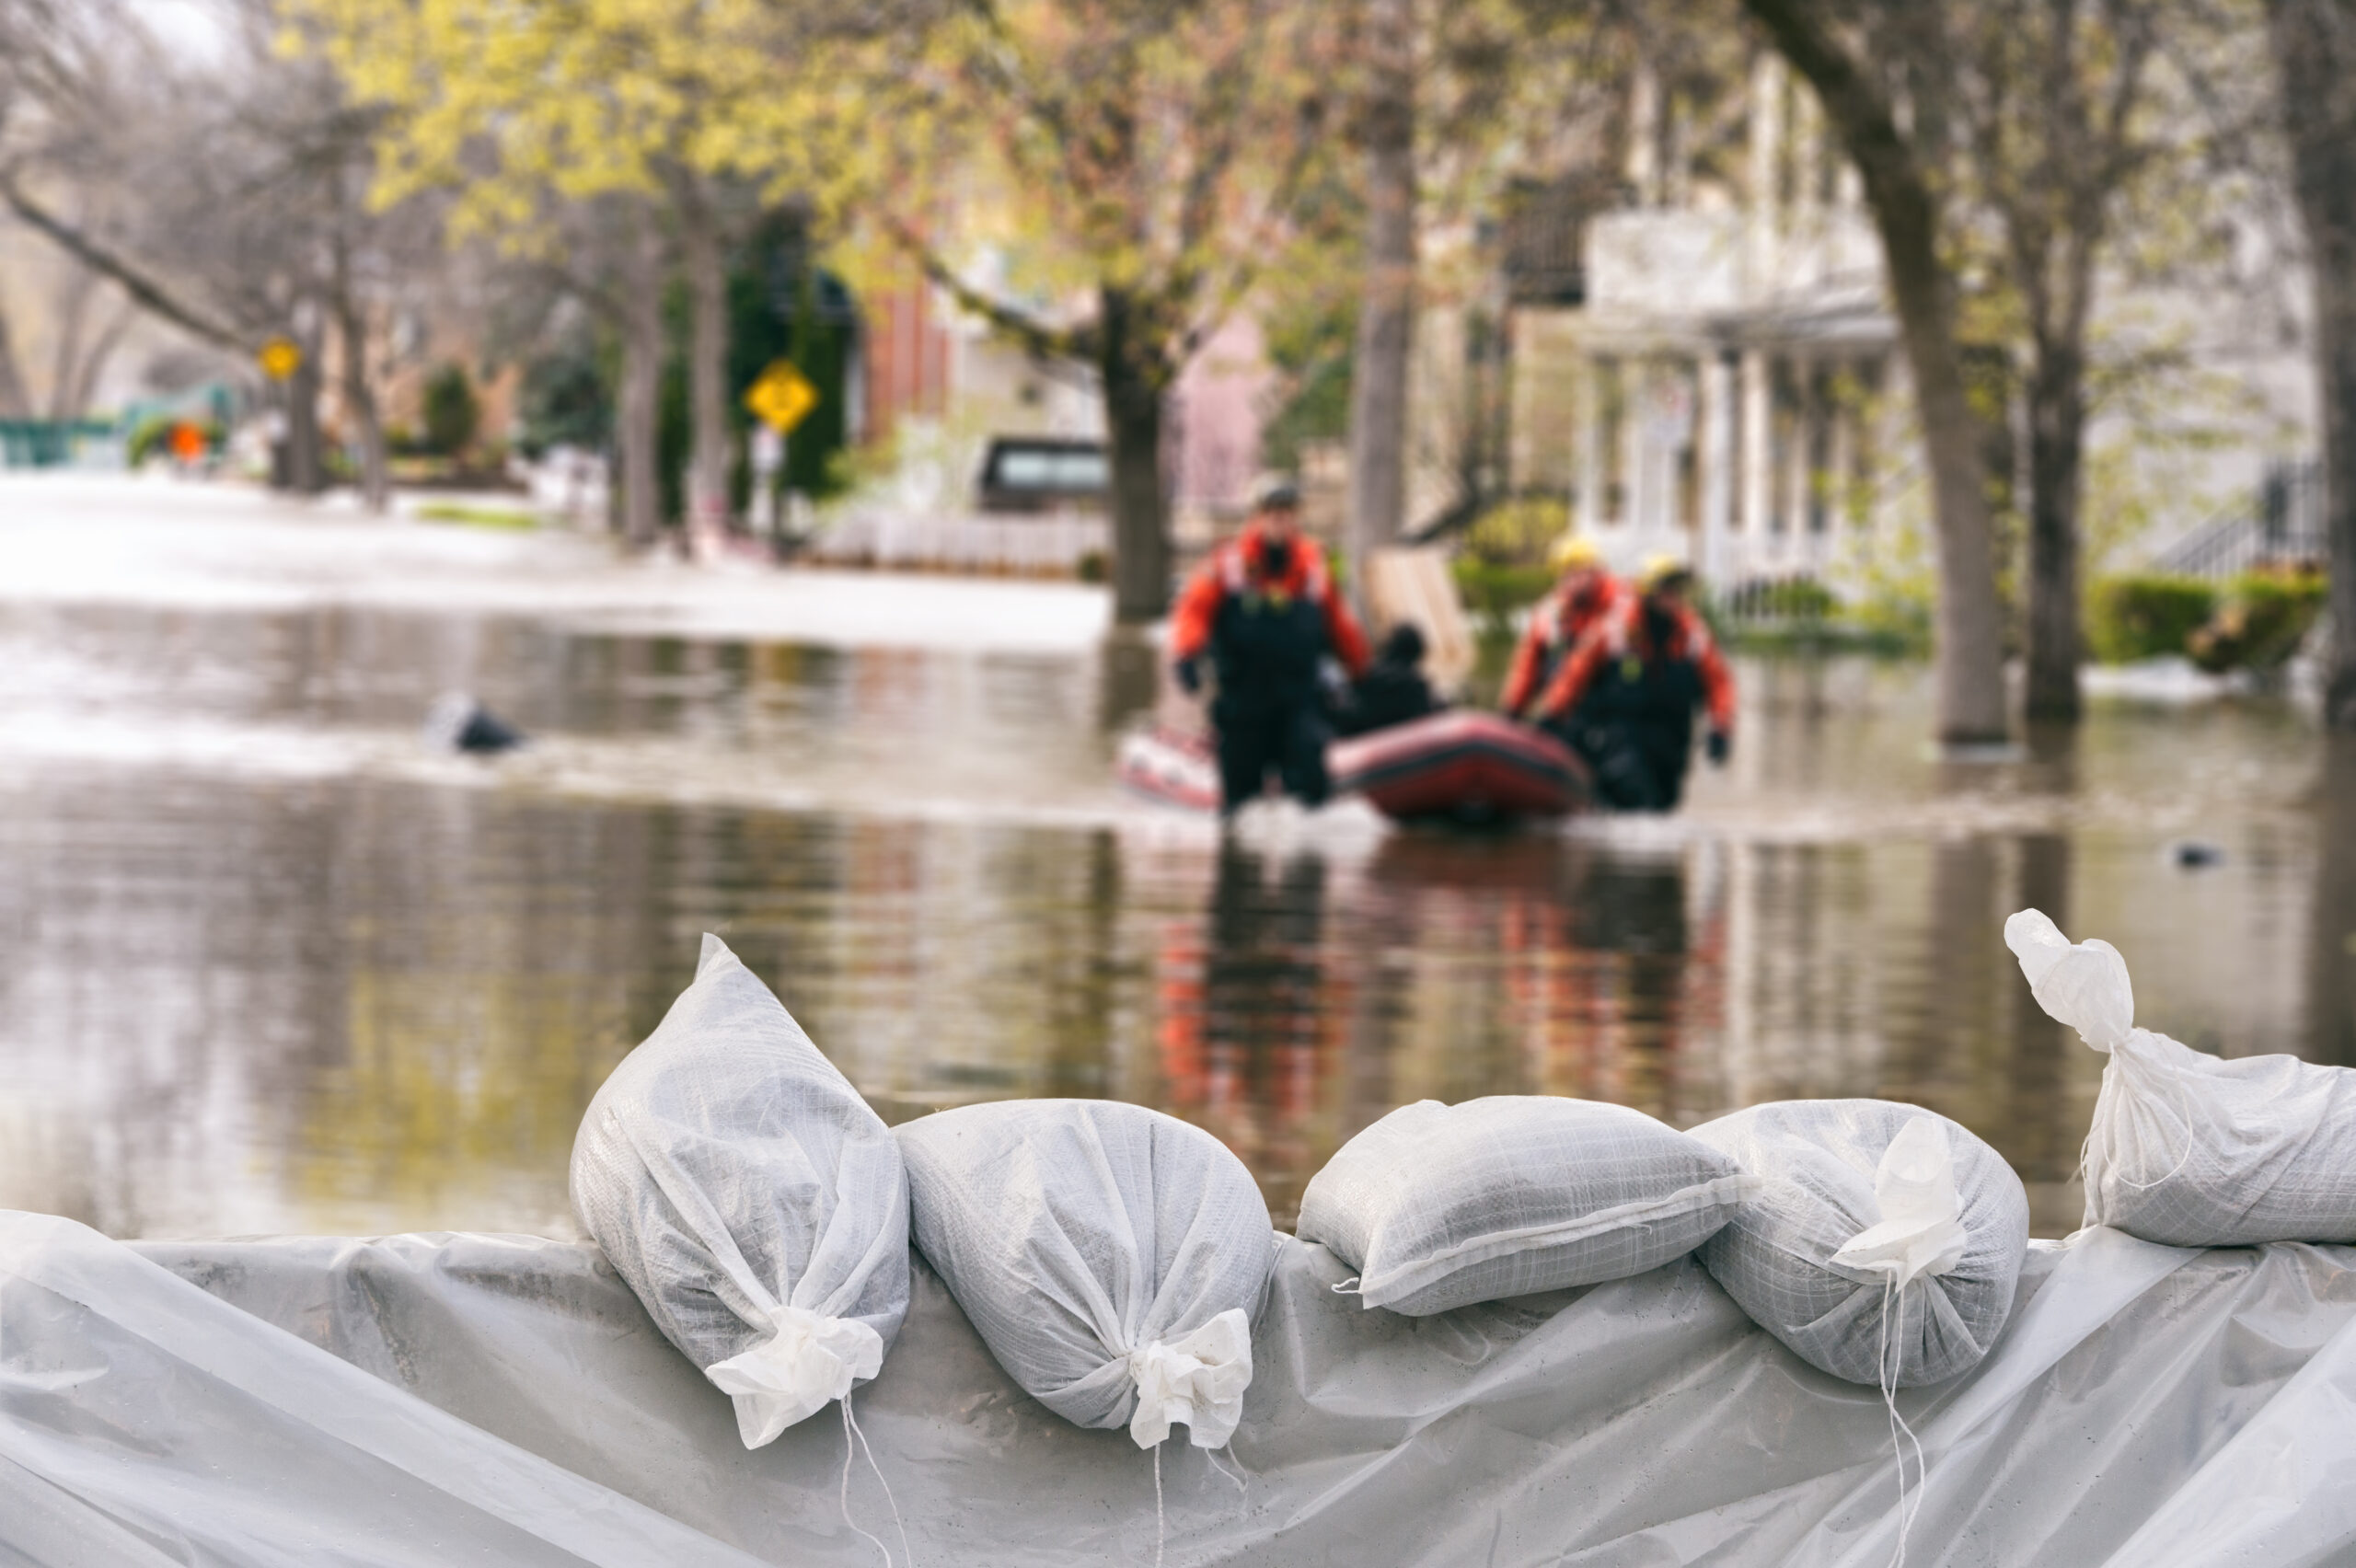 Flood Insurance: Before and After the Storm